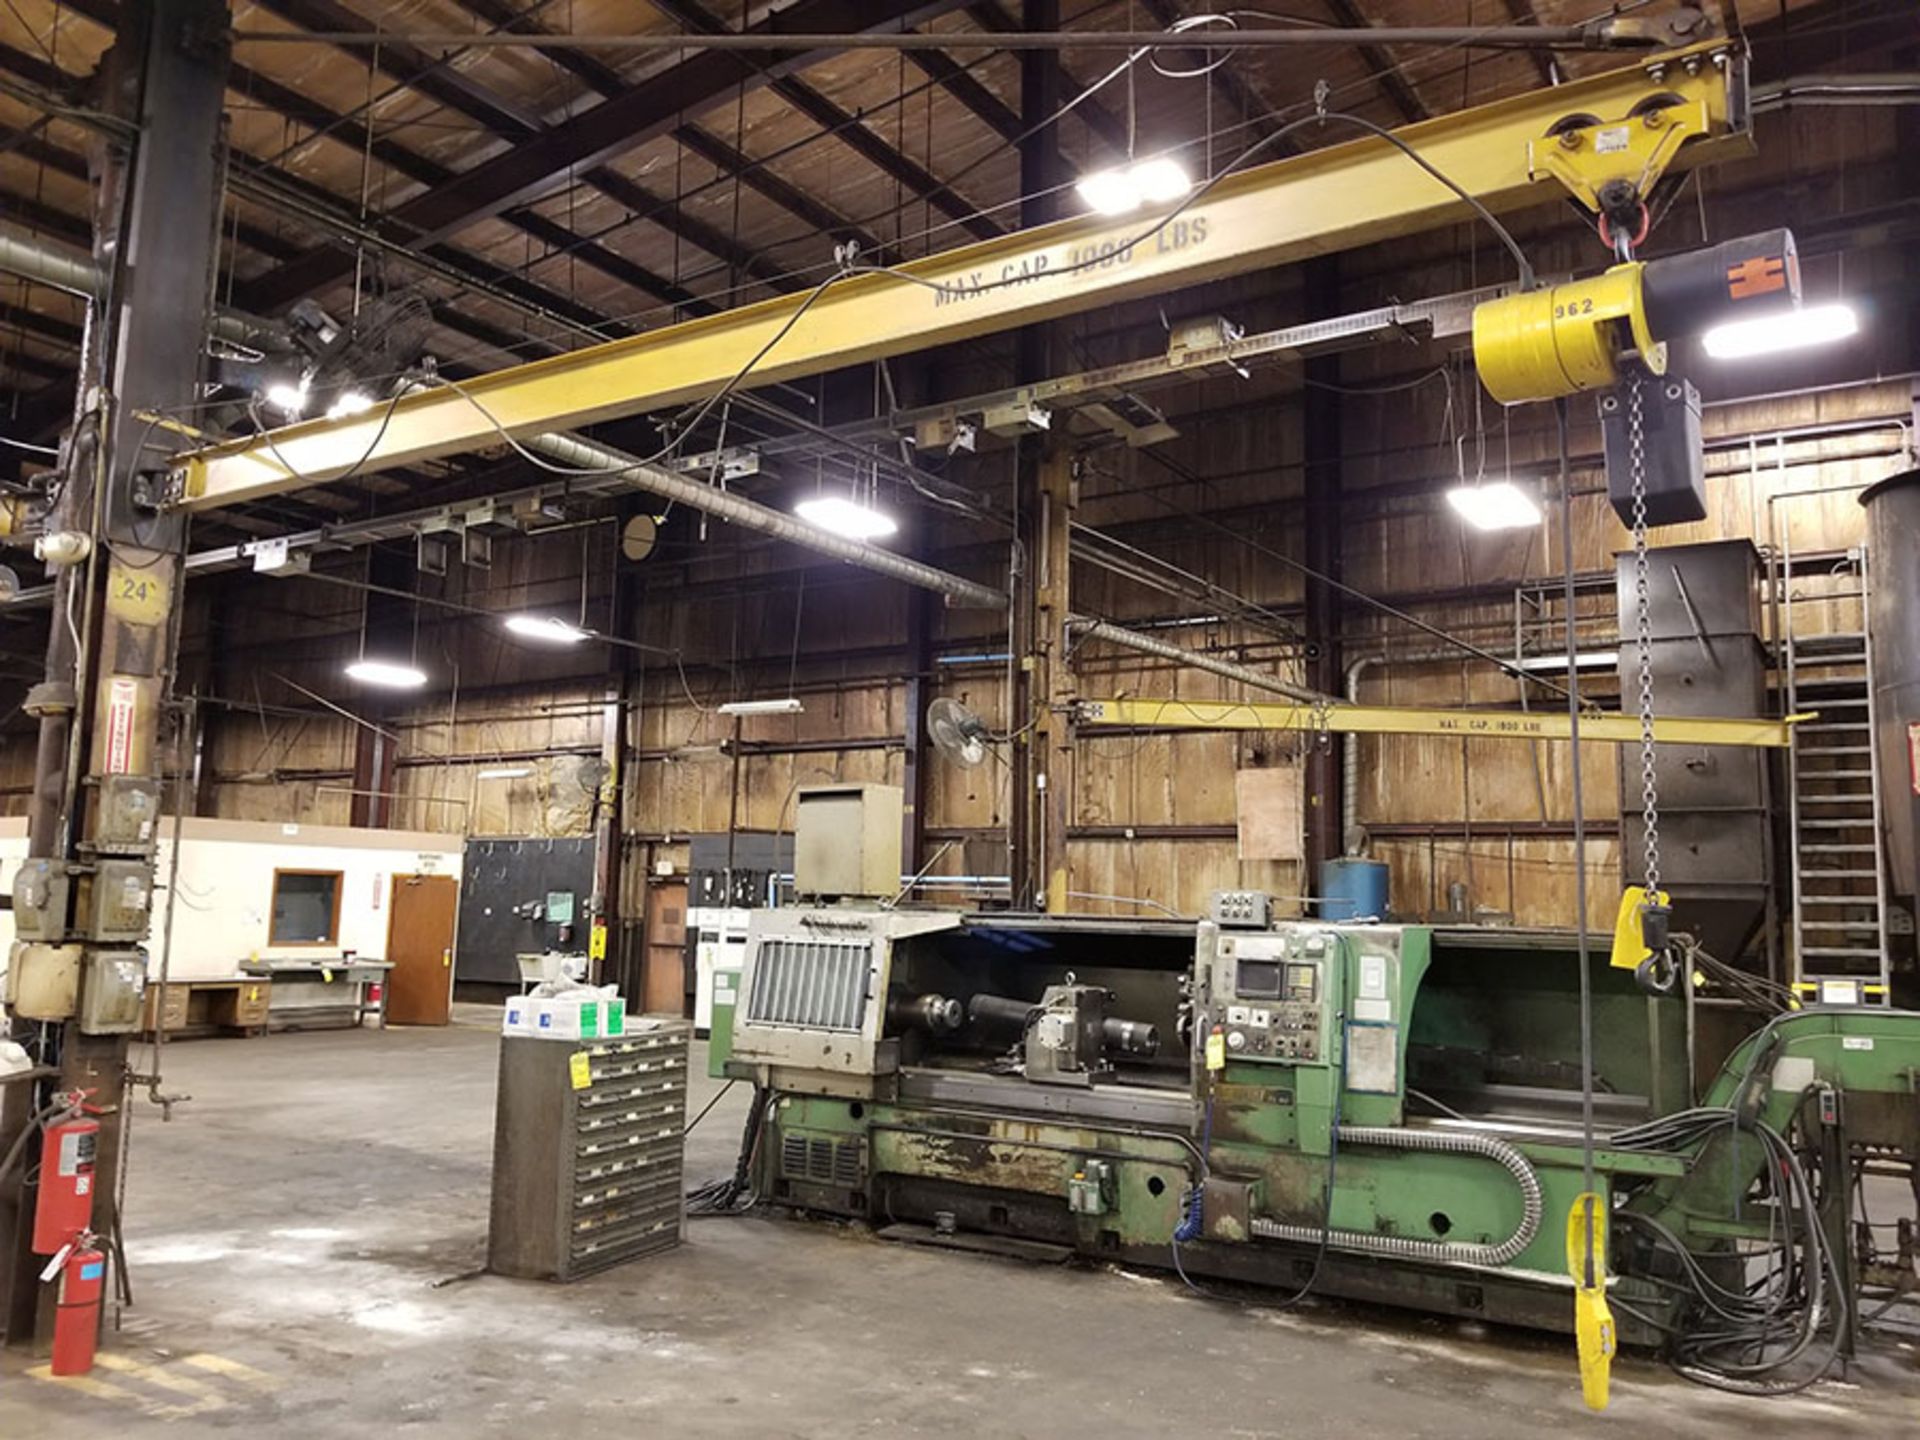 1/2 TON COLUMN MOUNTED JIB CRANE WITH BUDGIT 1/2 TON ELECTRIC CHAIN HOIST WITH PENDANT CONTROL - Image 2 of 5